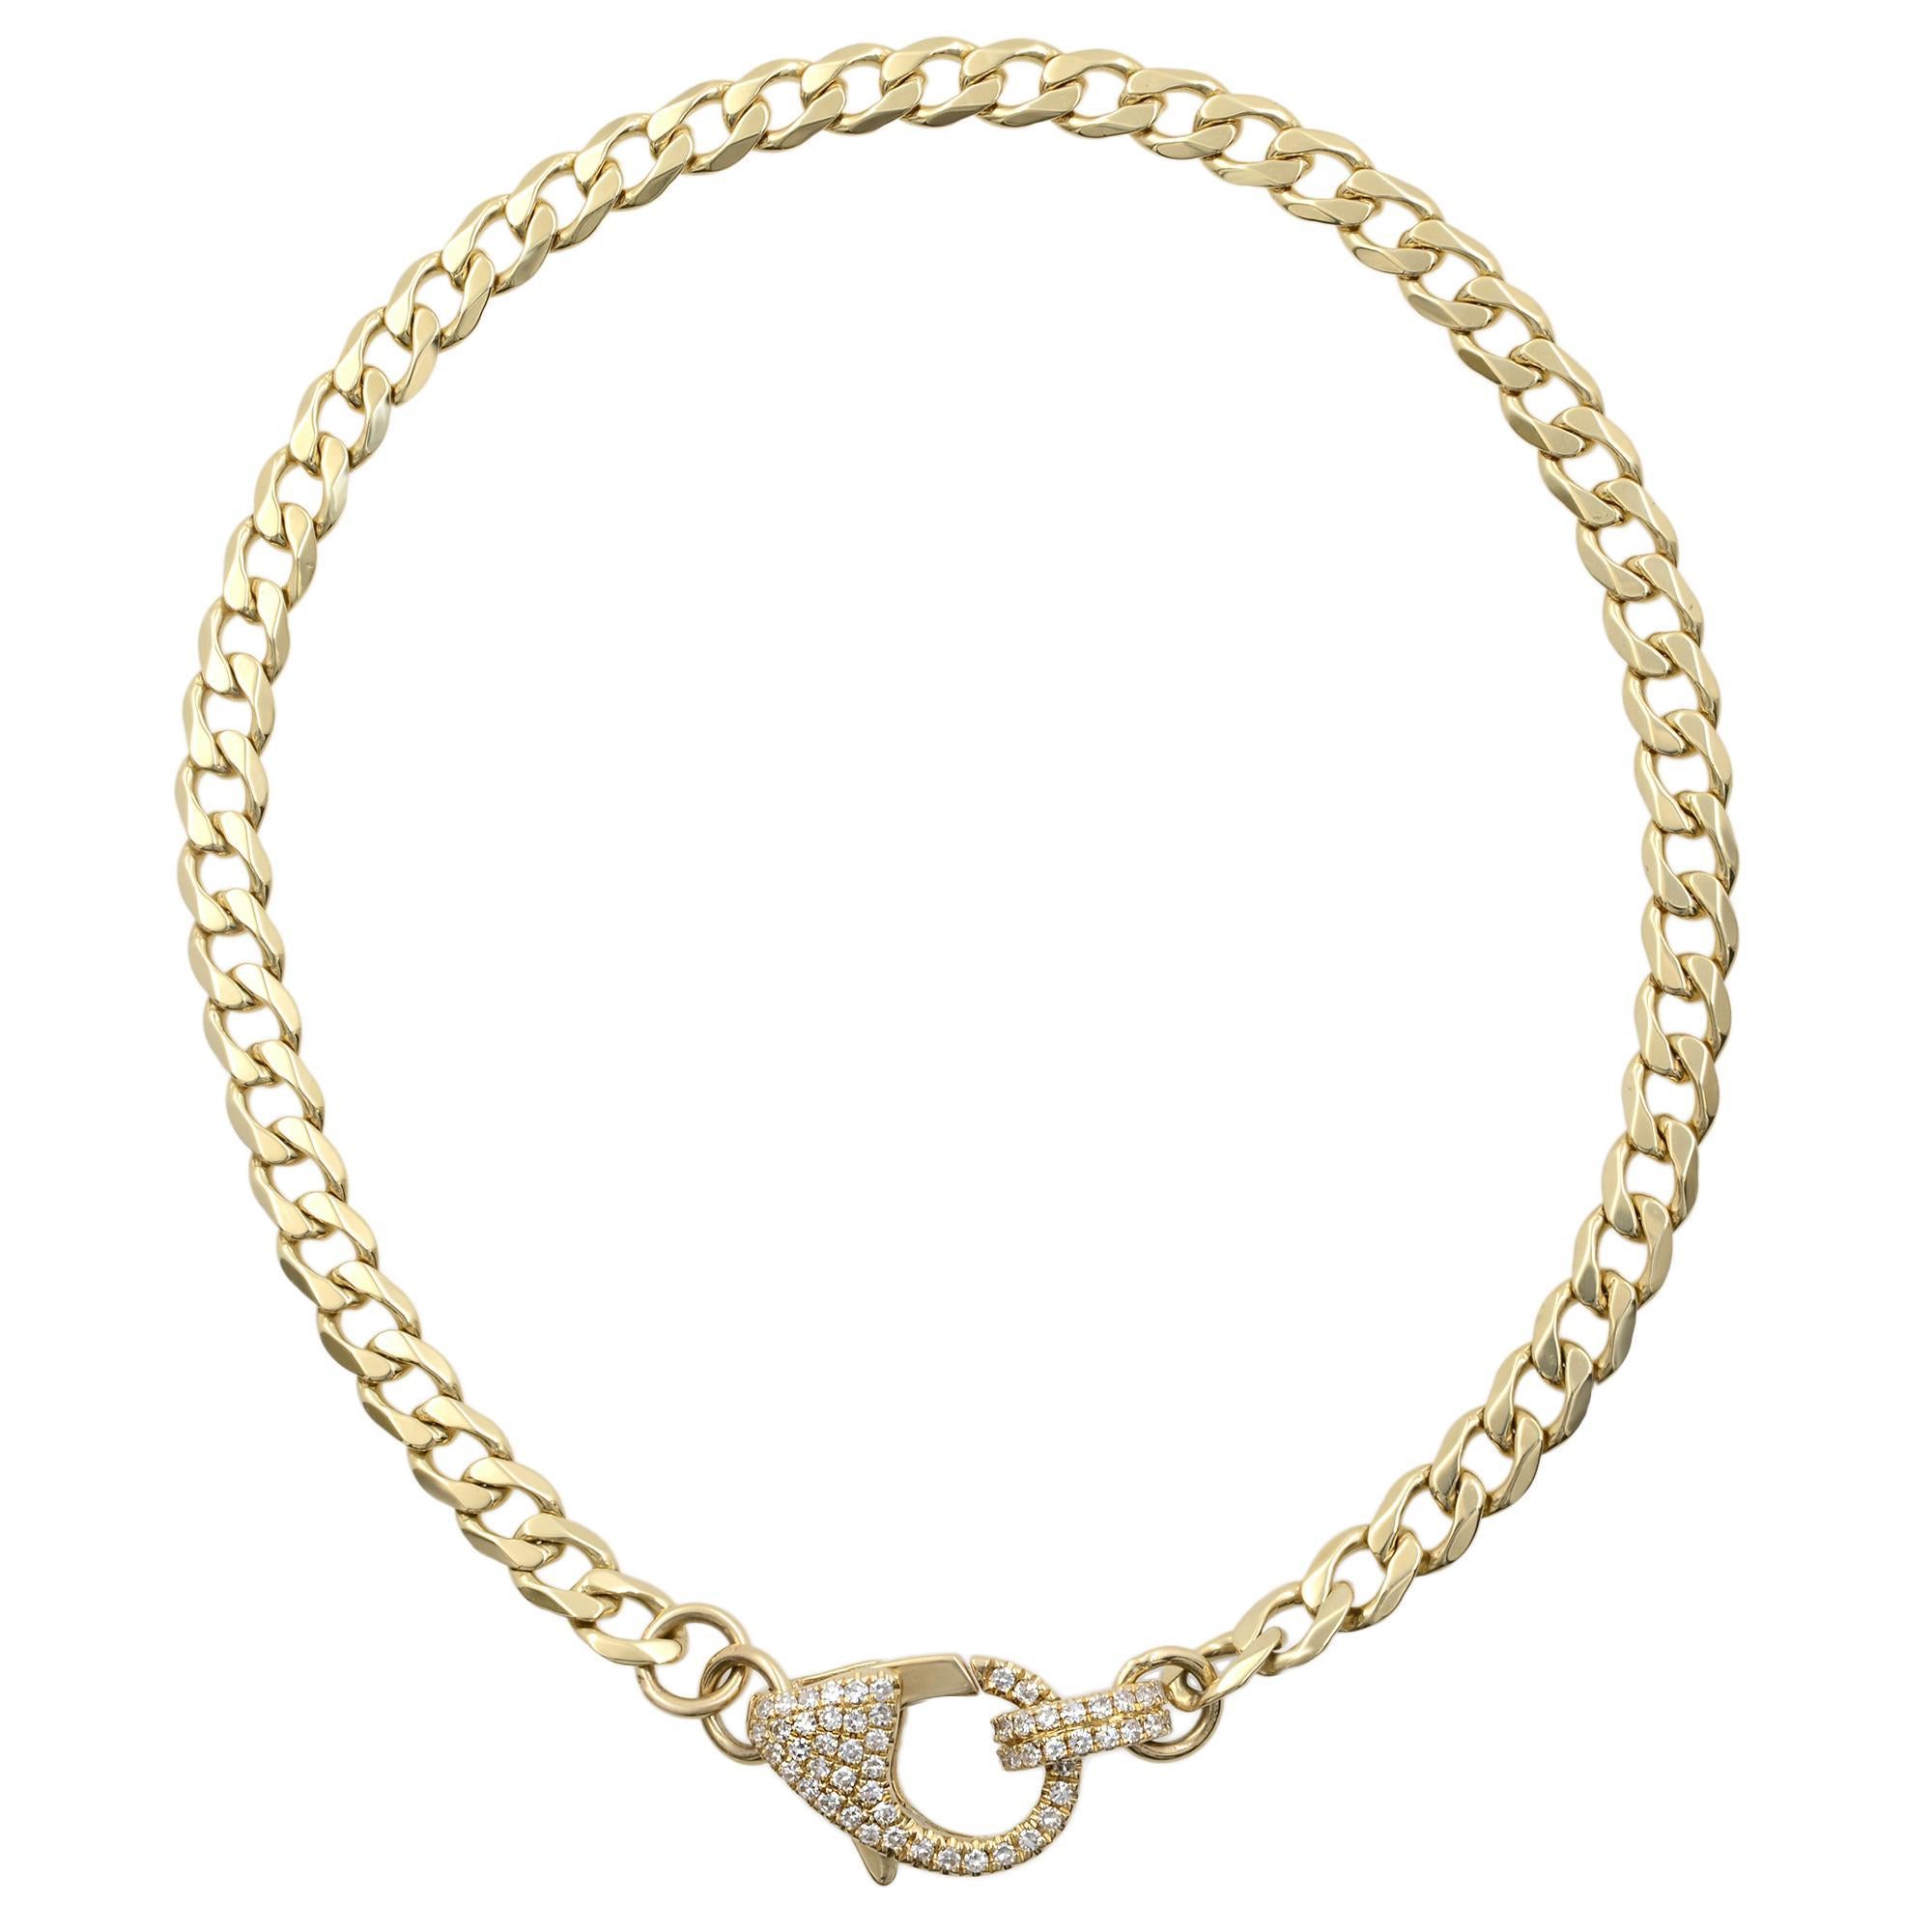 Embrace the classic link chain bracelet look with this perfect everyday wear stackable bracelet. This sleek elegant bracelet is crafted in high polish 14k yellow gold and features a lobster lock closure encrusted with pave set round cut diamonds.